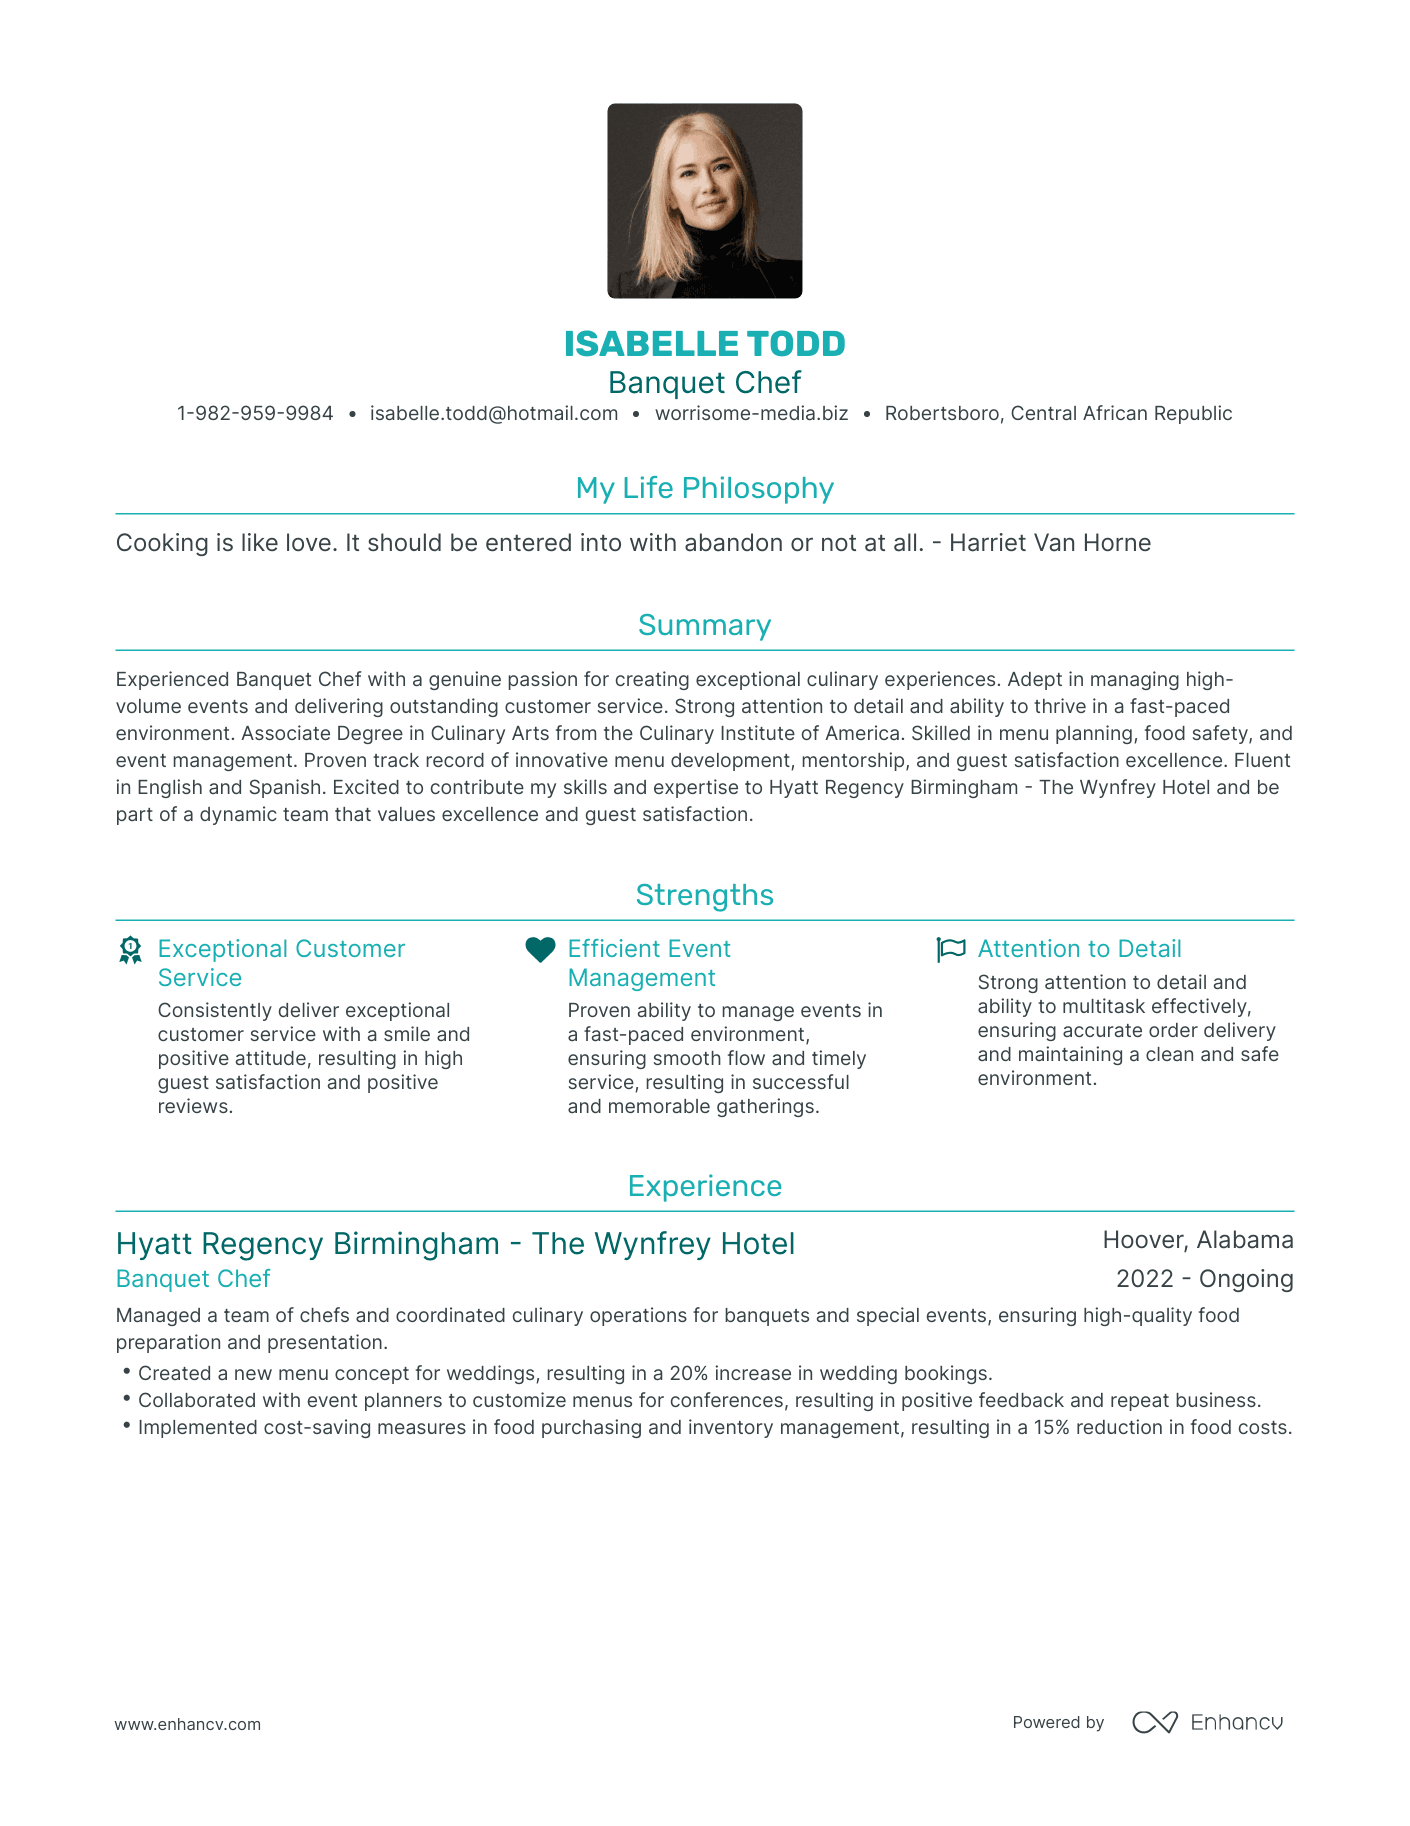 3 Banquet Chef Resume Examples & How-To Guide for 2023